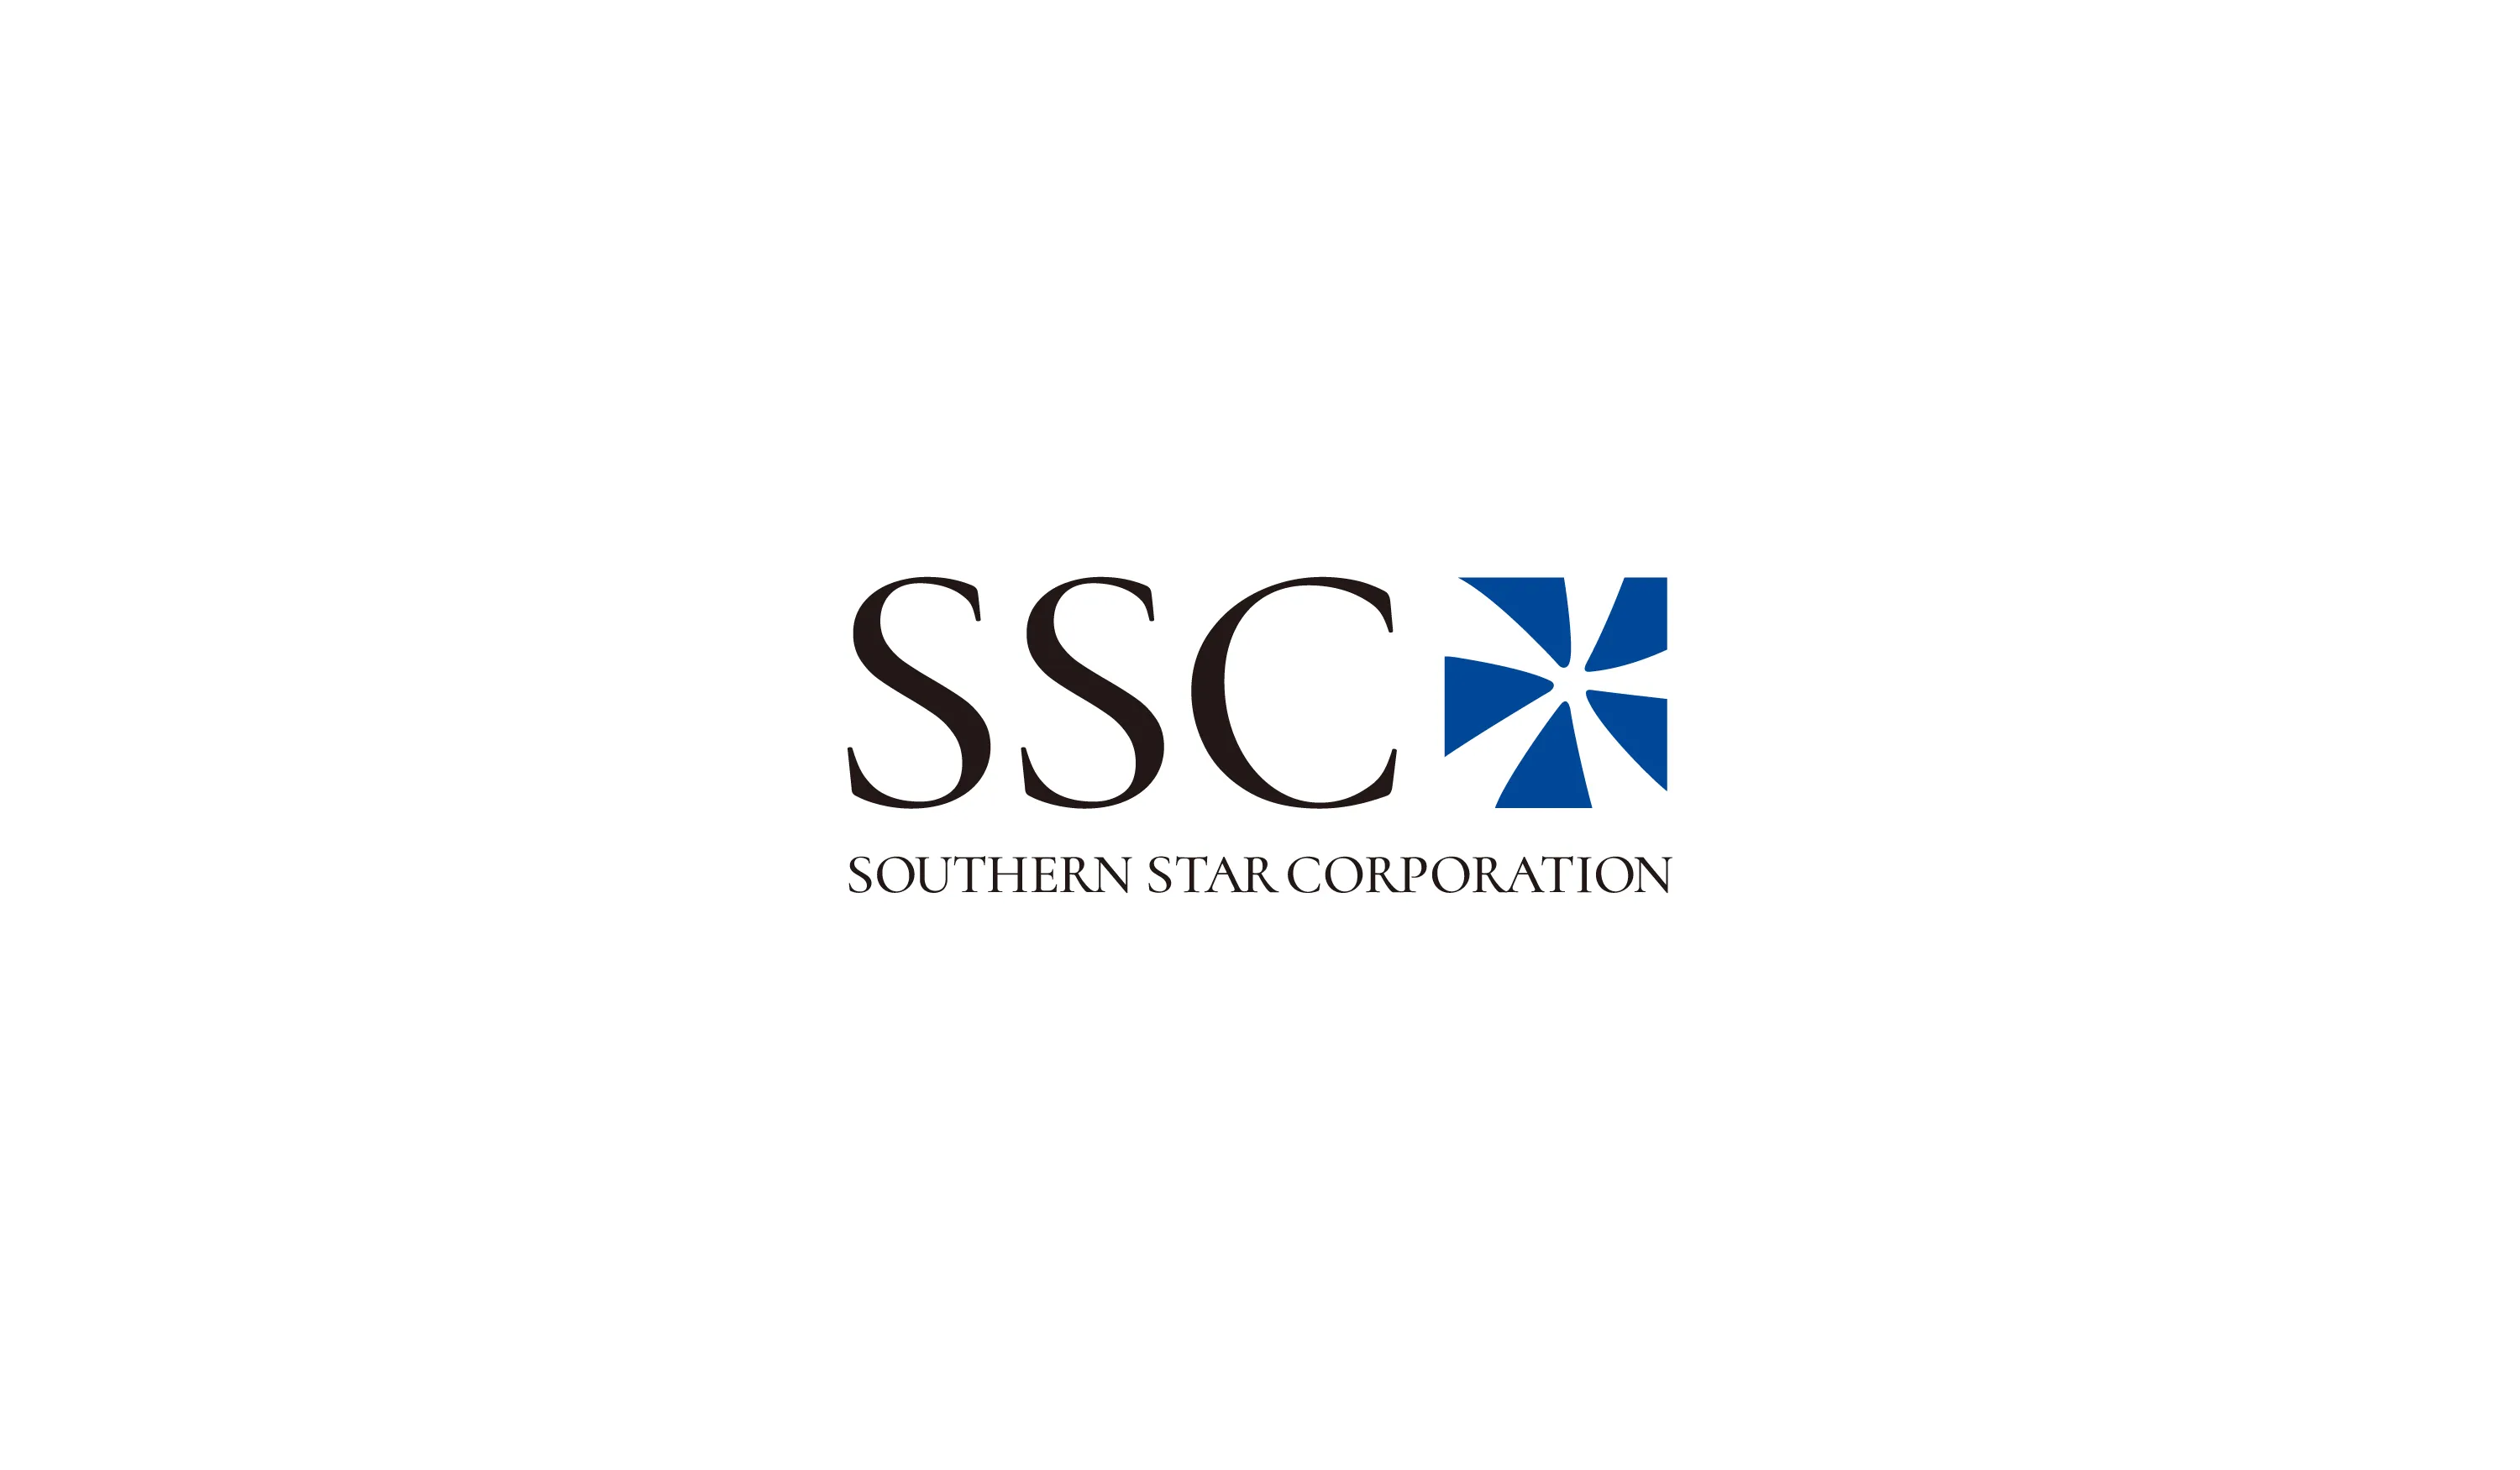 SOUTHERN STAR CORP.